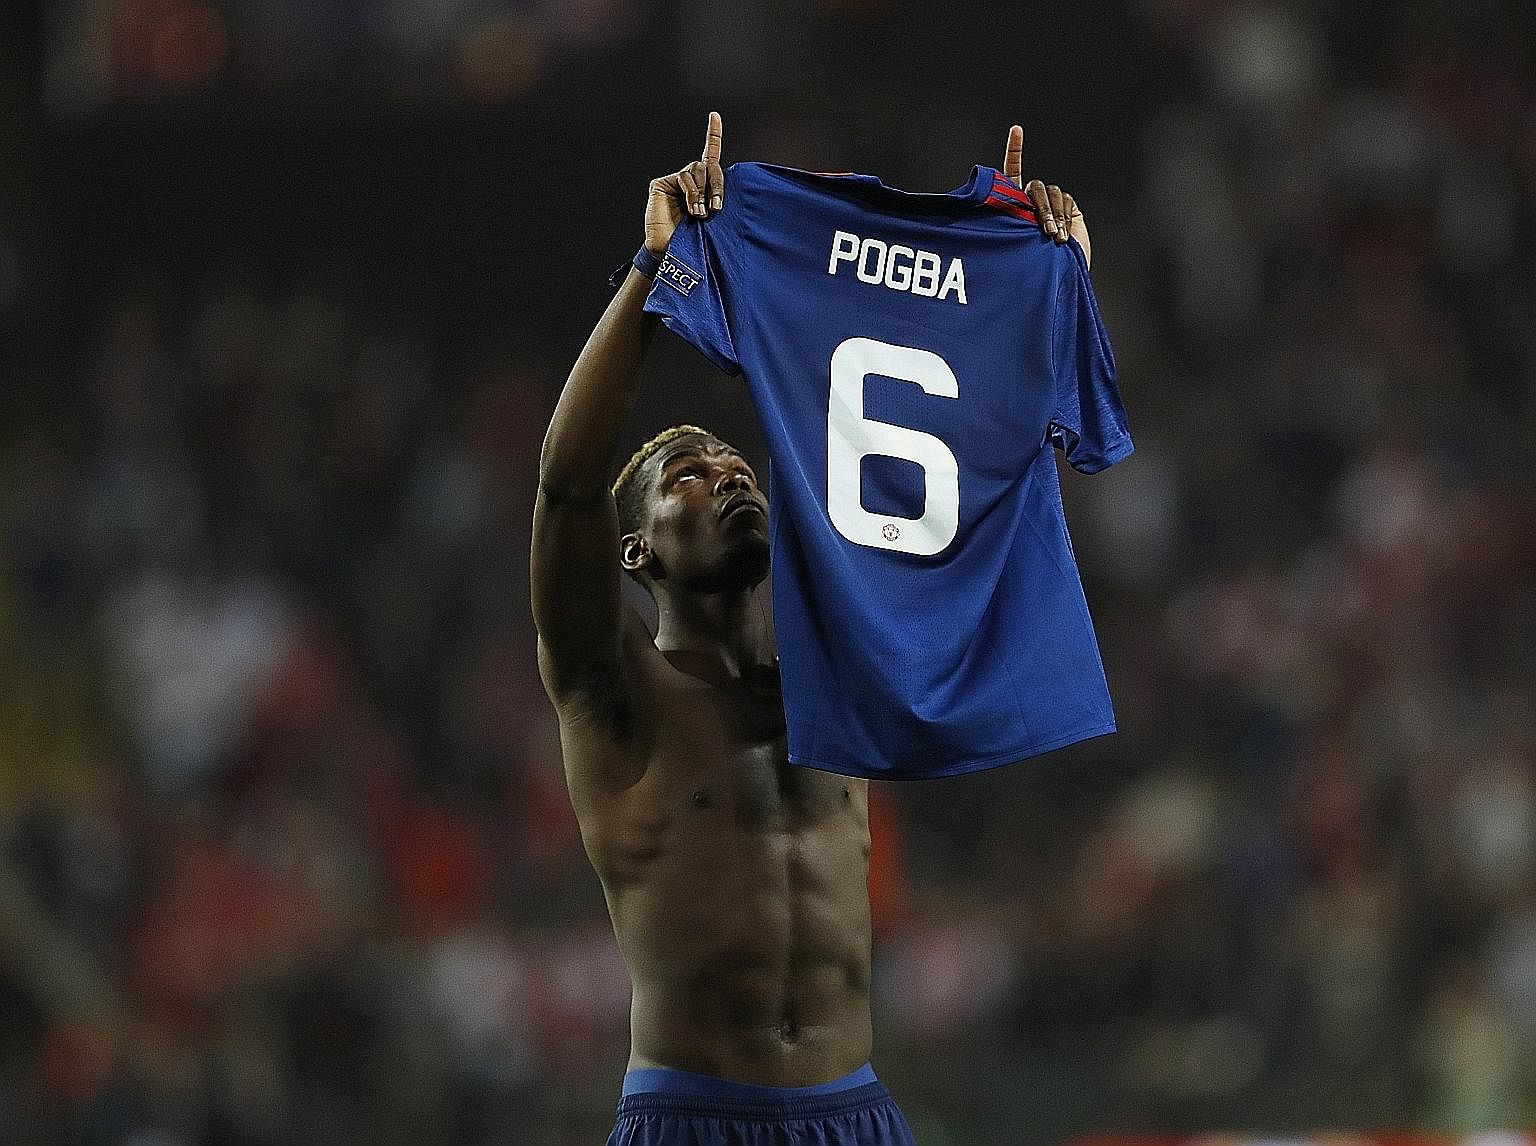 Paul Pogba pointing to the heavens in an emotional celebration on Wednesday night, after Manchester United beat Ajax 2-0 to win the Europa League in Stockholm. Today, 82,000 rugby fans and 90,000 football fans will attend the most important games of 